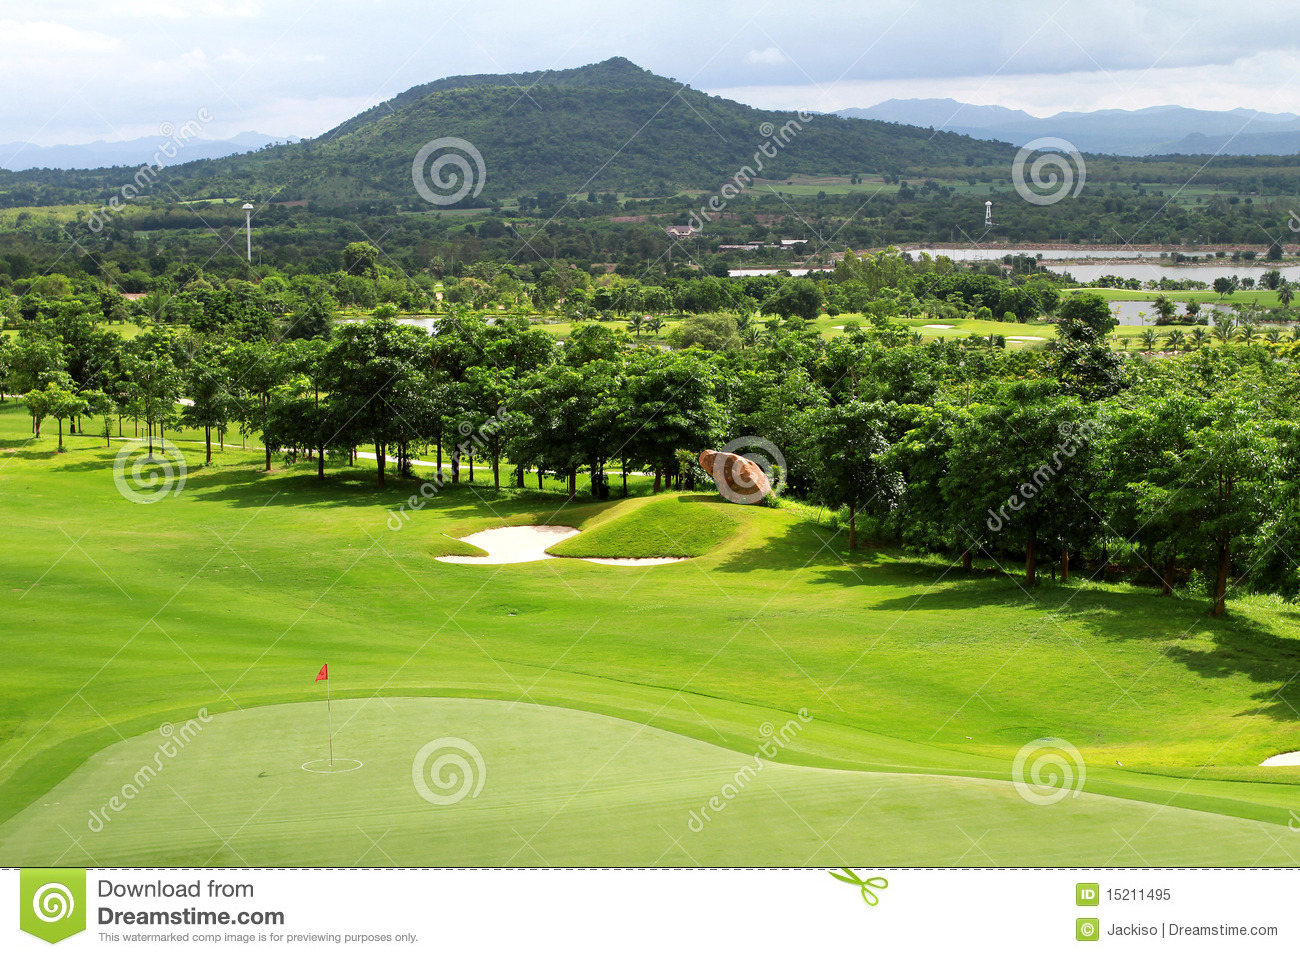 Pictures of Green Golf Course in the Morning